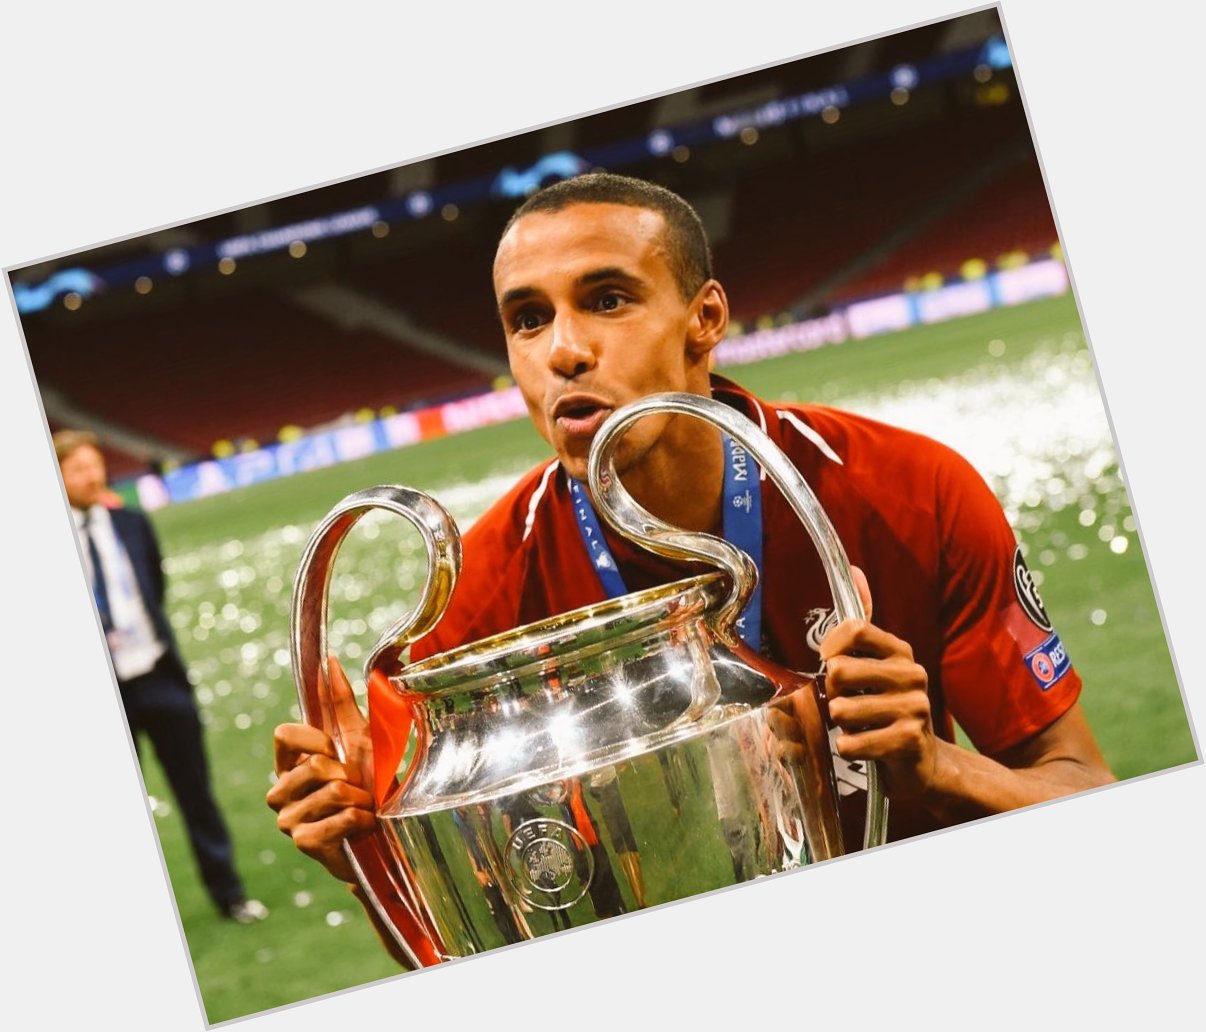 Happy birthday Joel Matip! One of the most underrated CBs in the prem.   